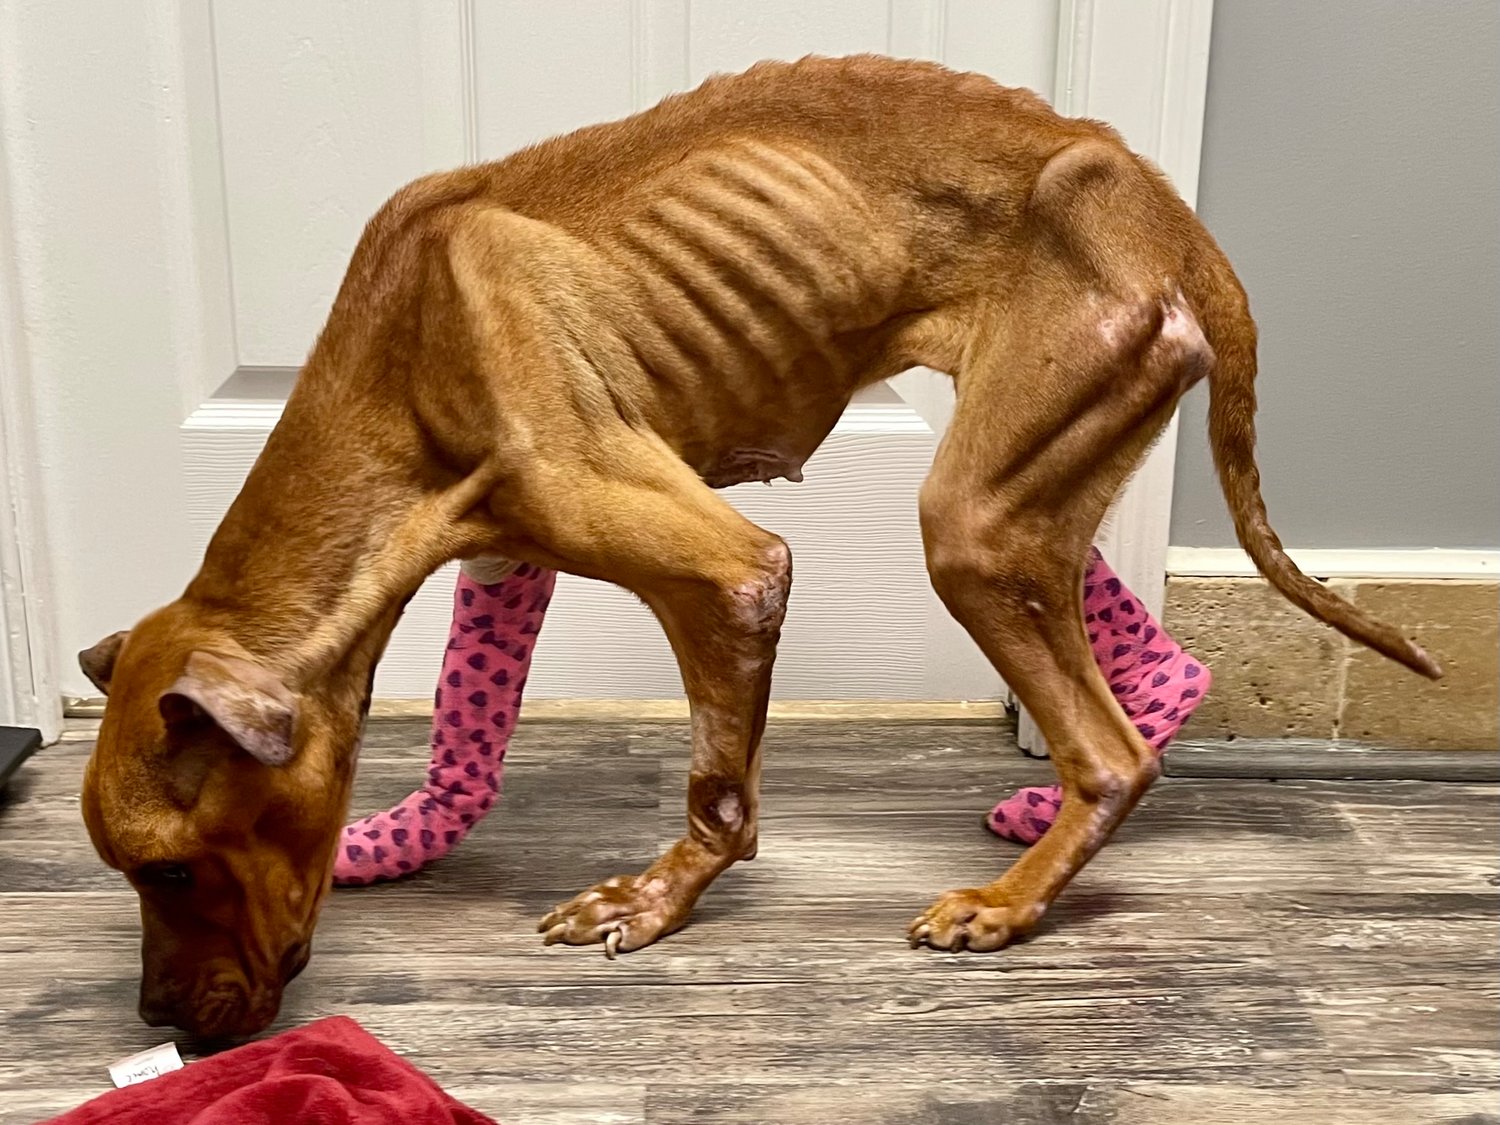 Animal shelter staff found an abandoned dog near death after the animal allegedly spent months caged and starving, authorities said.